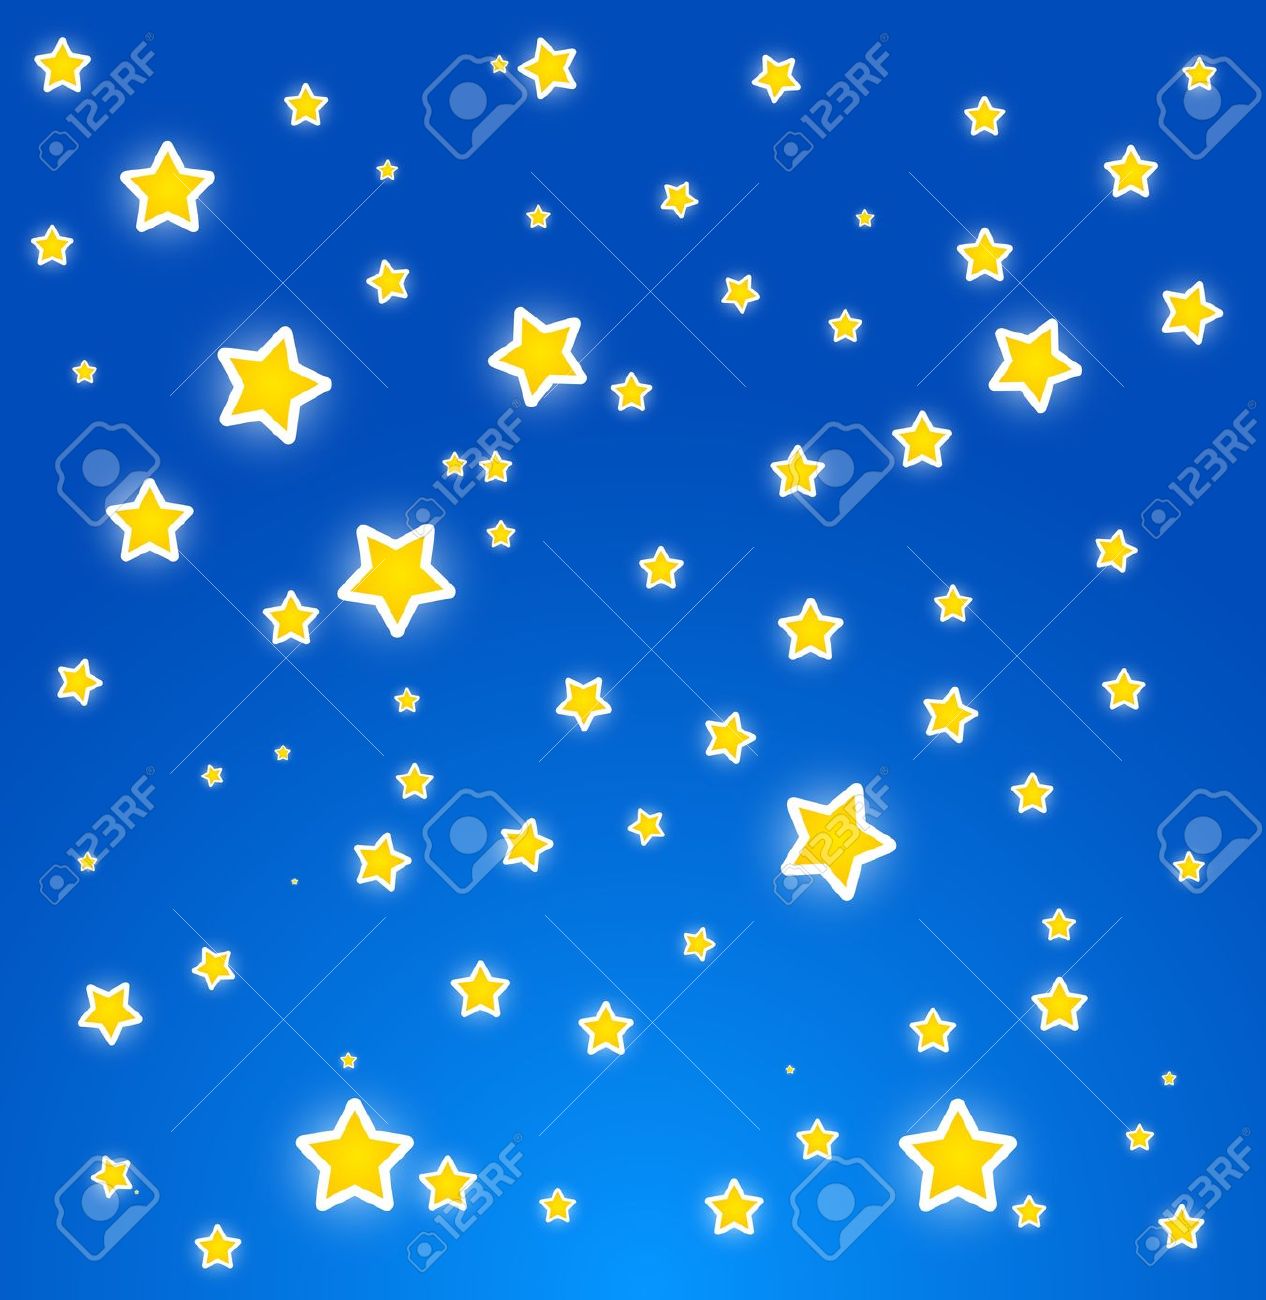 starry night clipart images - photo #12